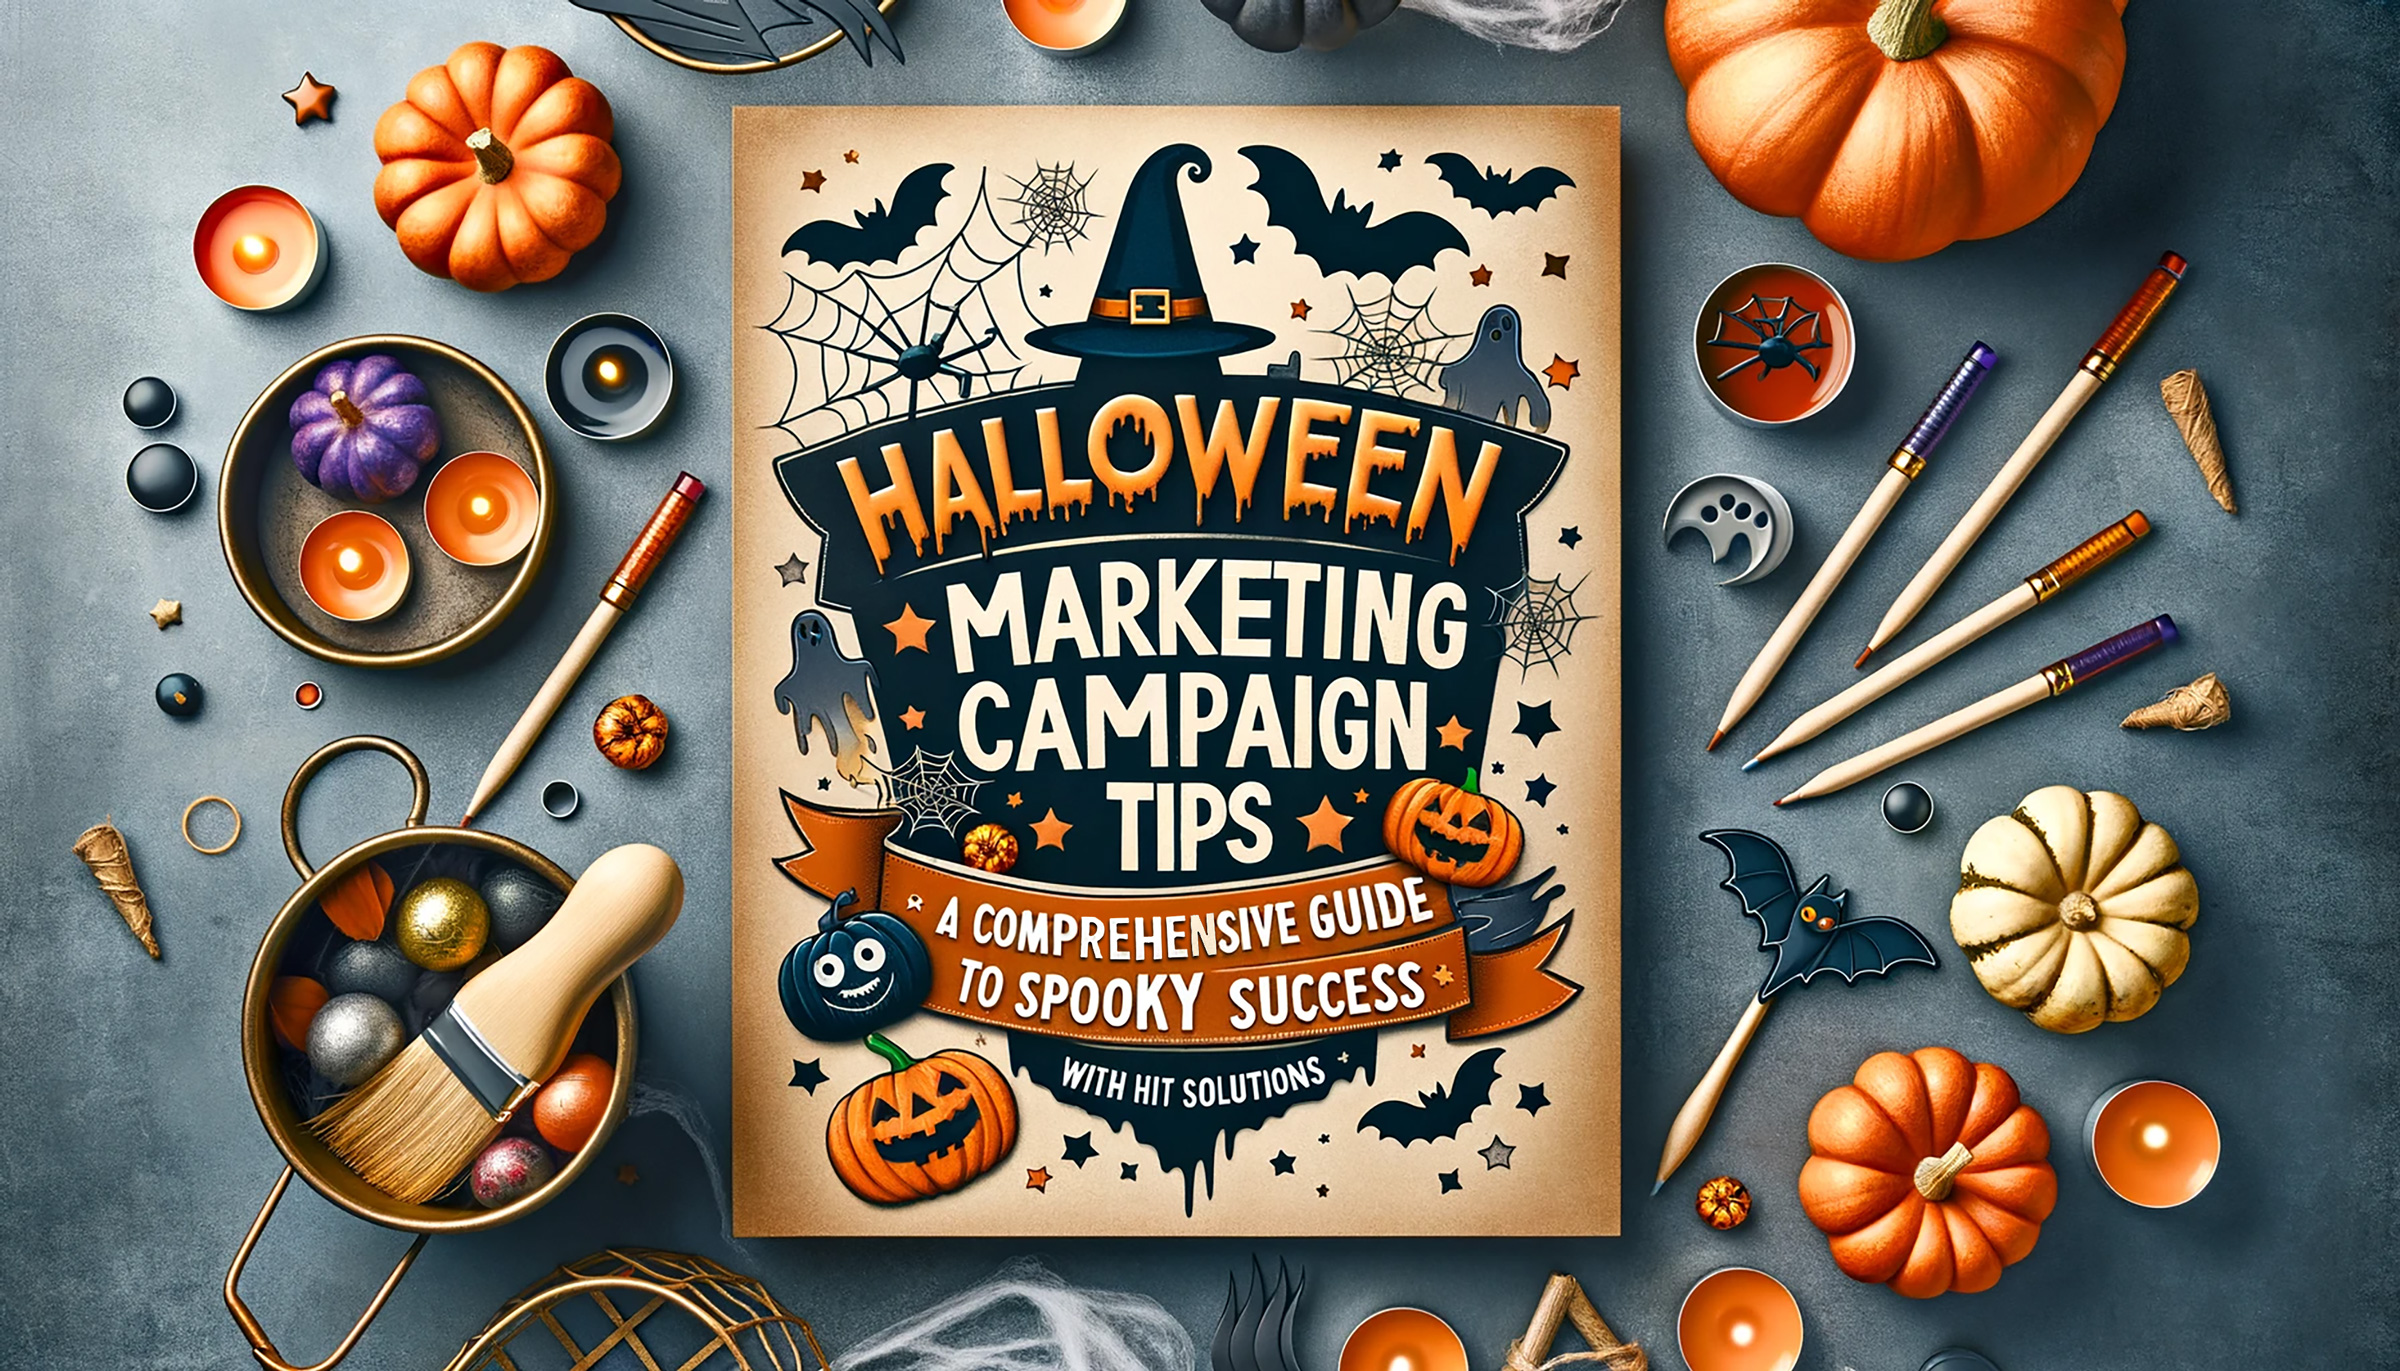 Halloween Marketing Campaign Tips and Ideas